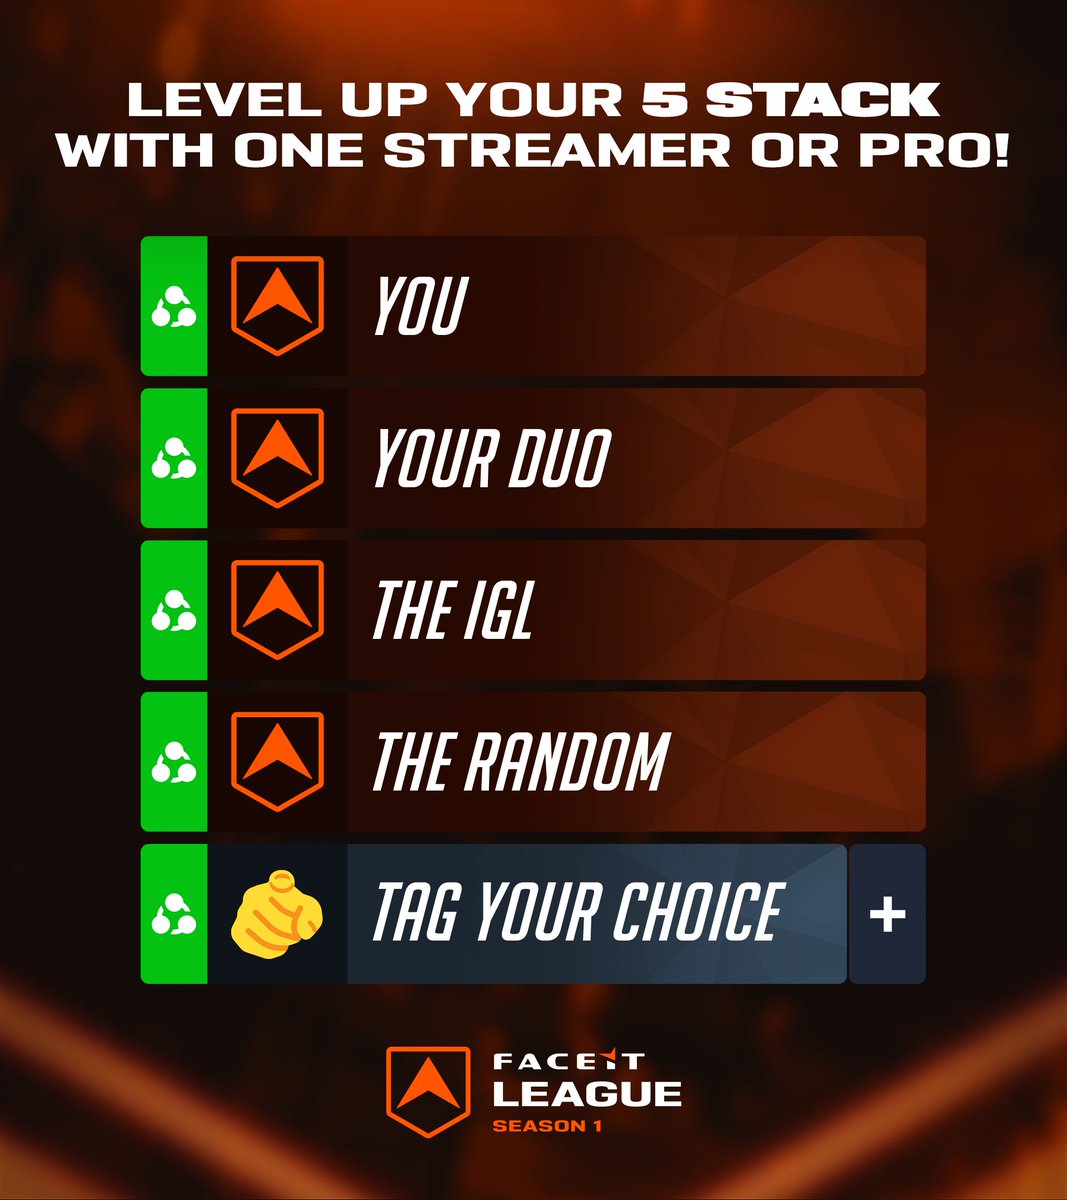 Pick one Overwatch streamer or pro player who could take your FACEIT League team to new levels or just bring the vibes to your 5 stack!